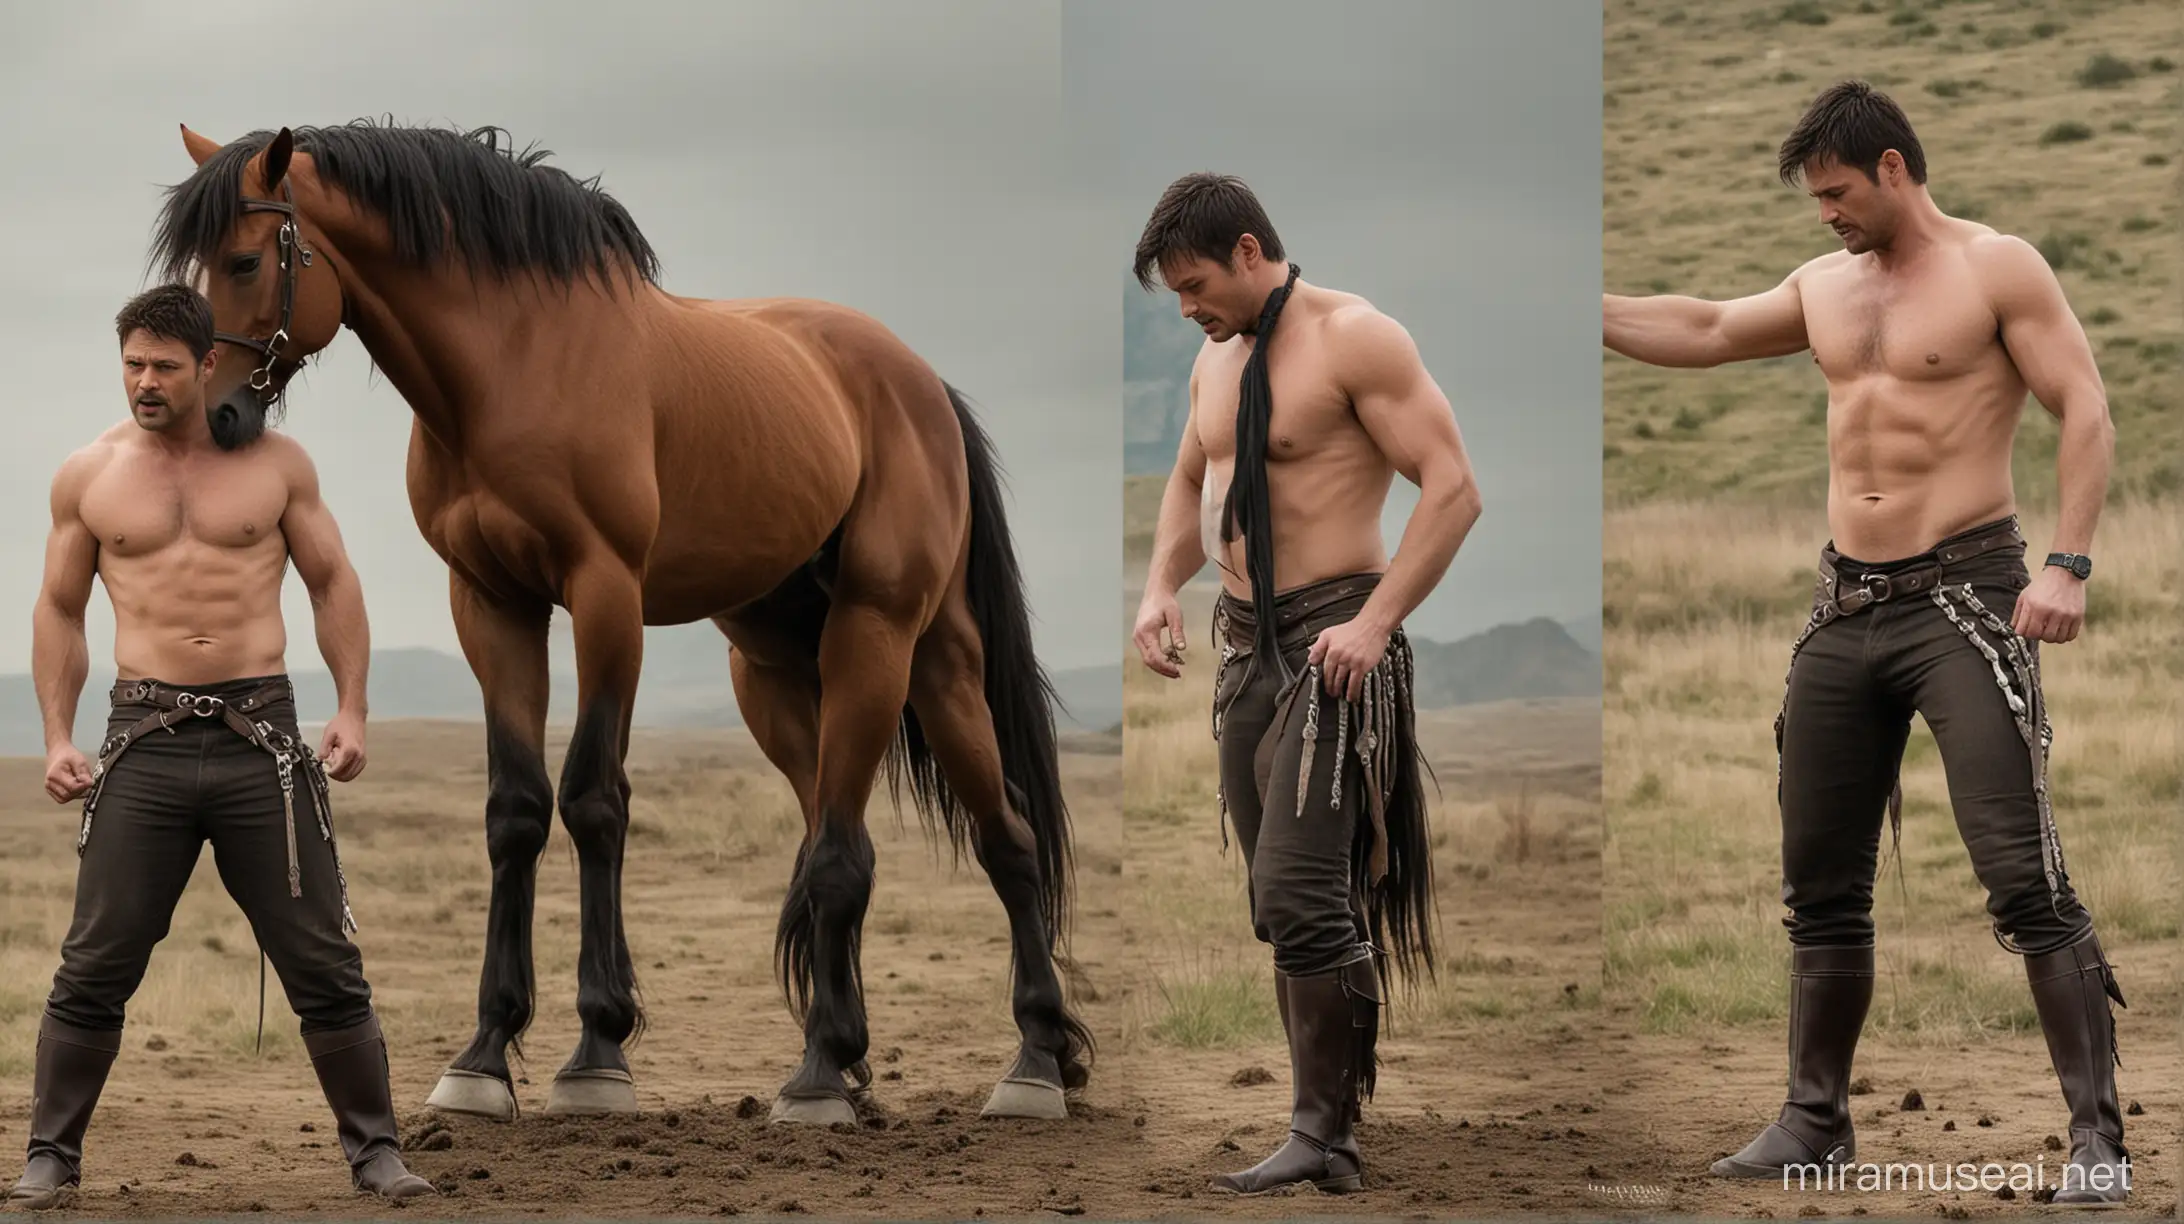 Actor Karl Urban Transforms into Horse Human Head with Horse Body and Neighing Pose